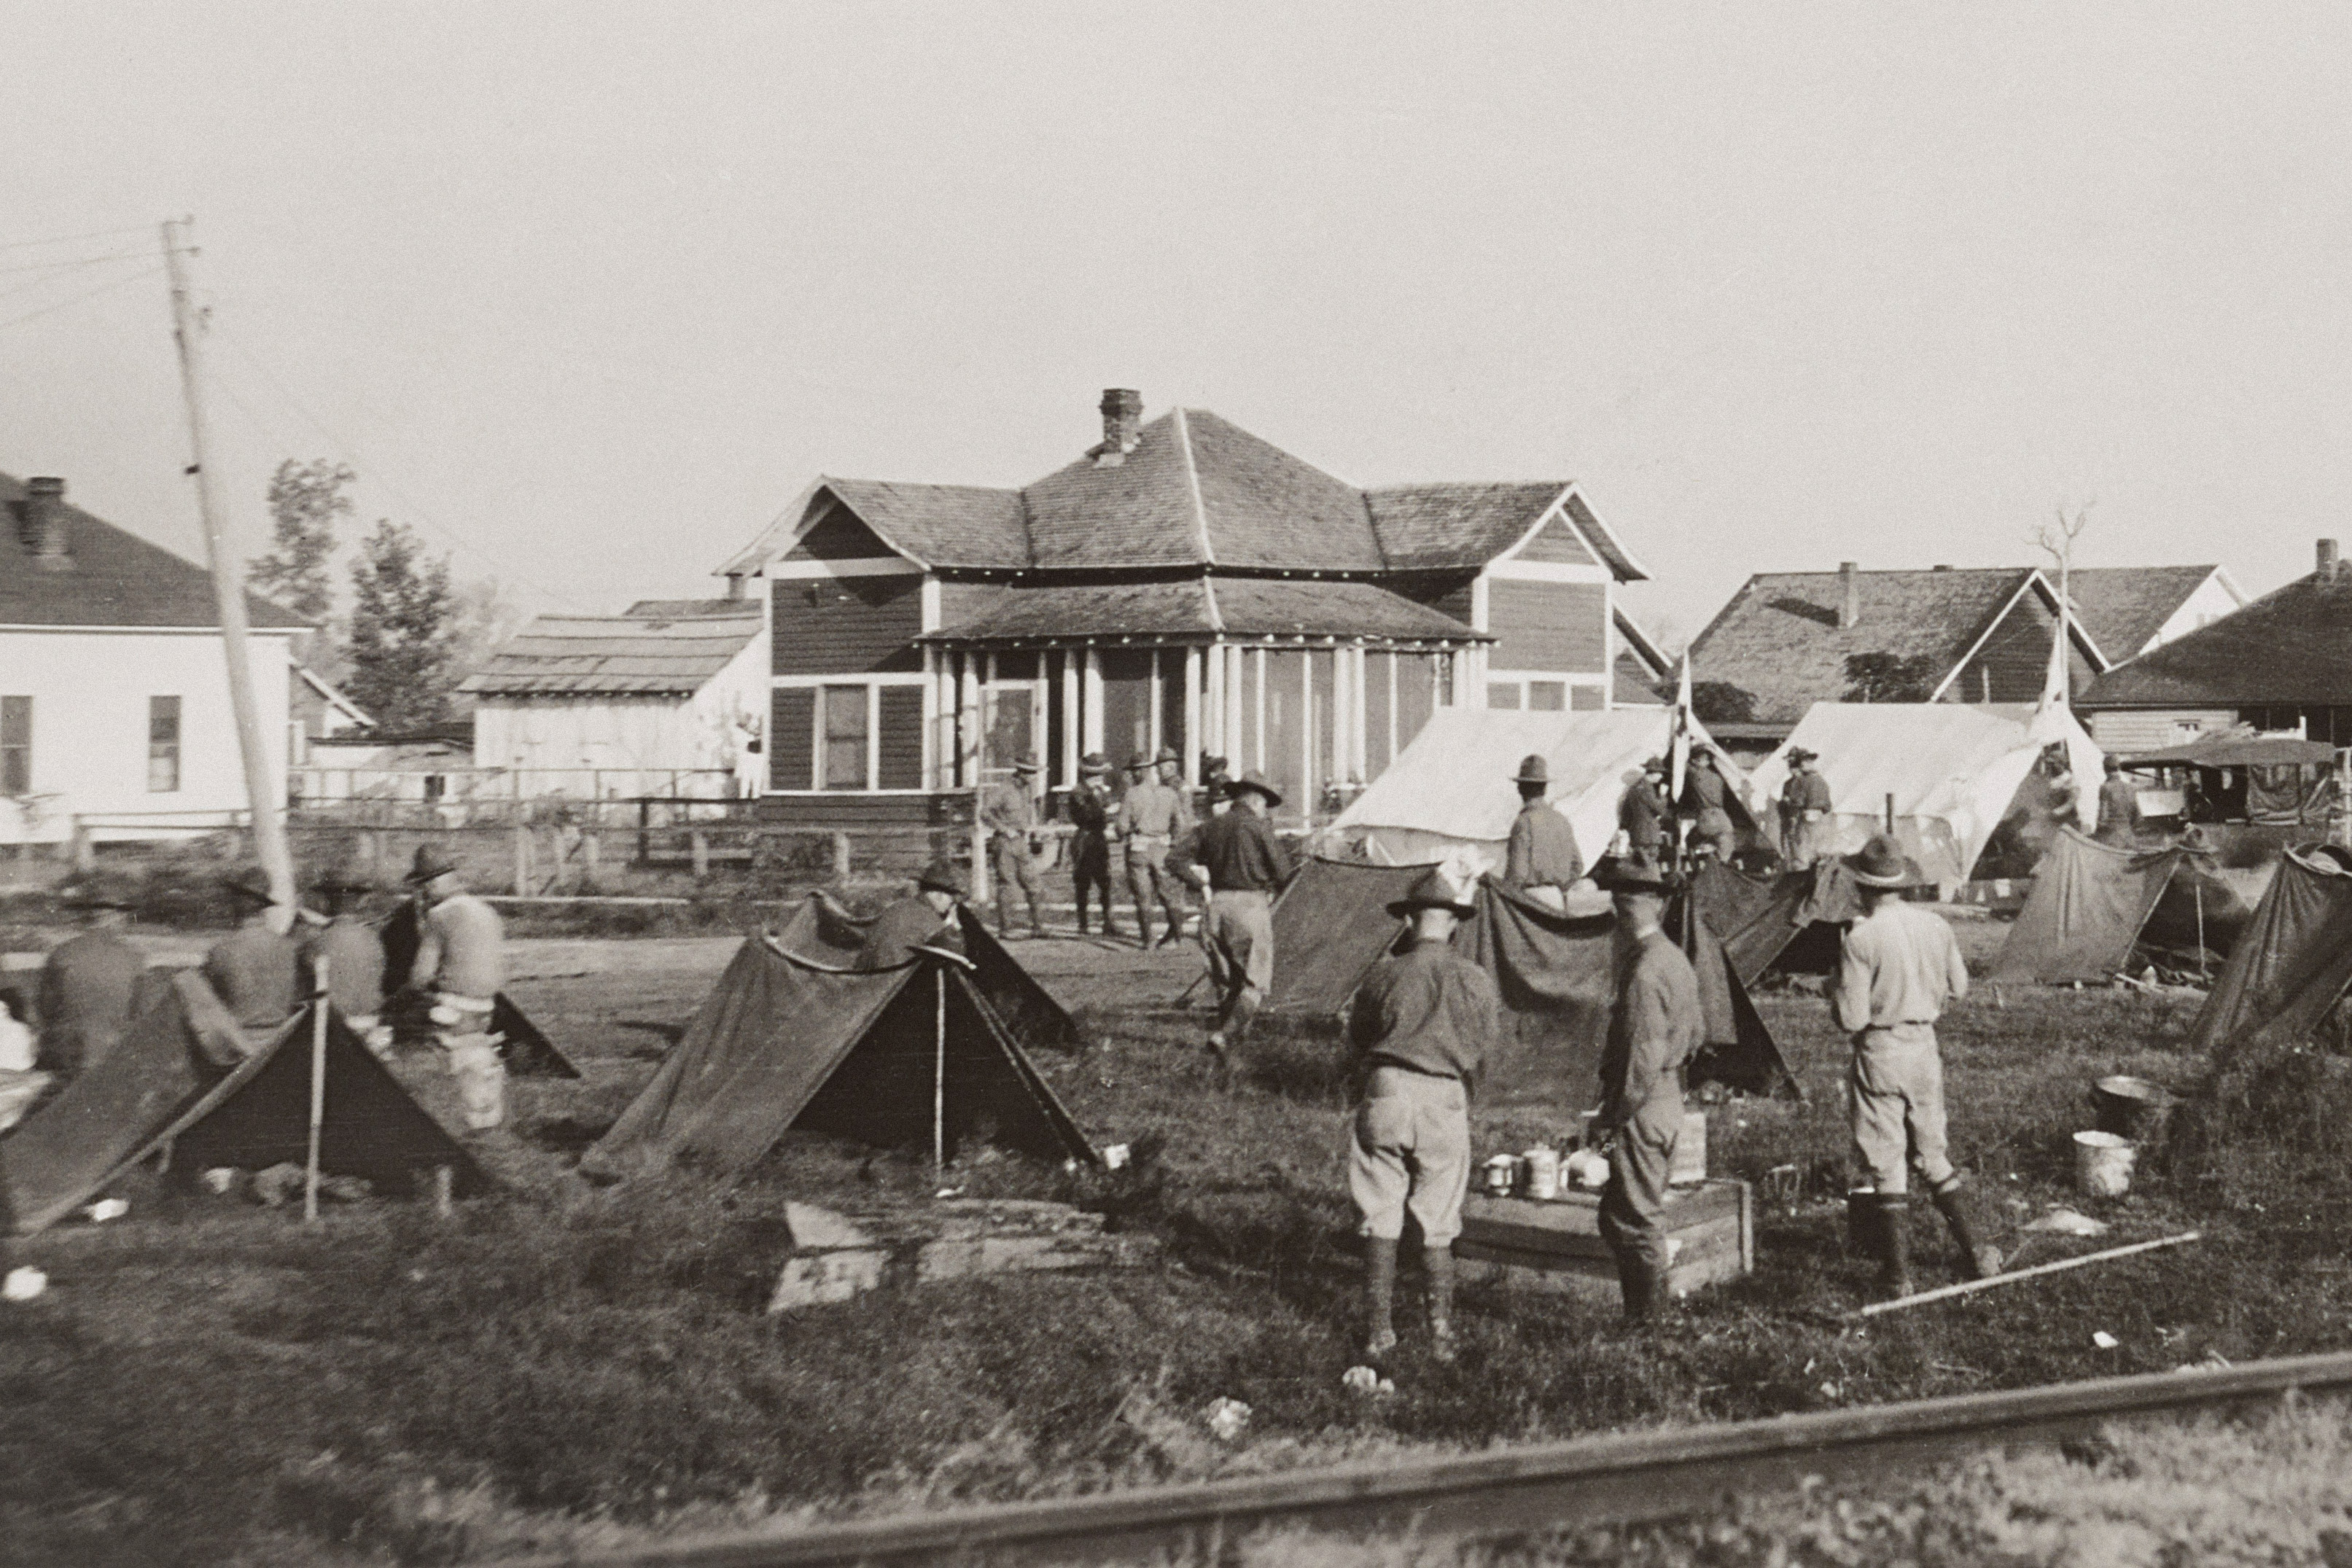 A historic photo from 1919 of soldiers standing in a camp of tents in Elaine, Arkansas.